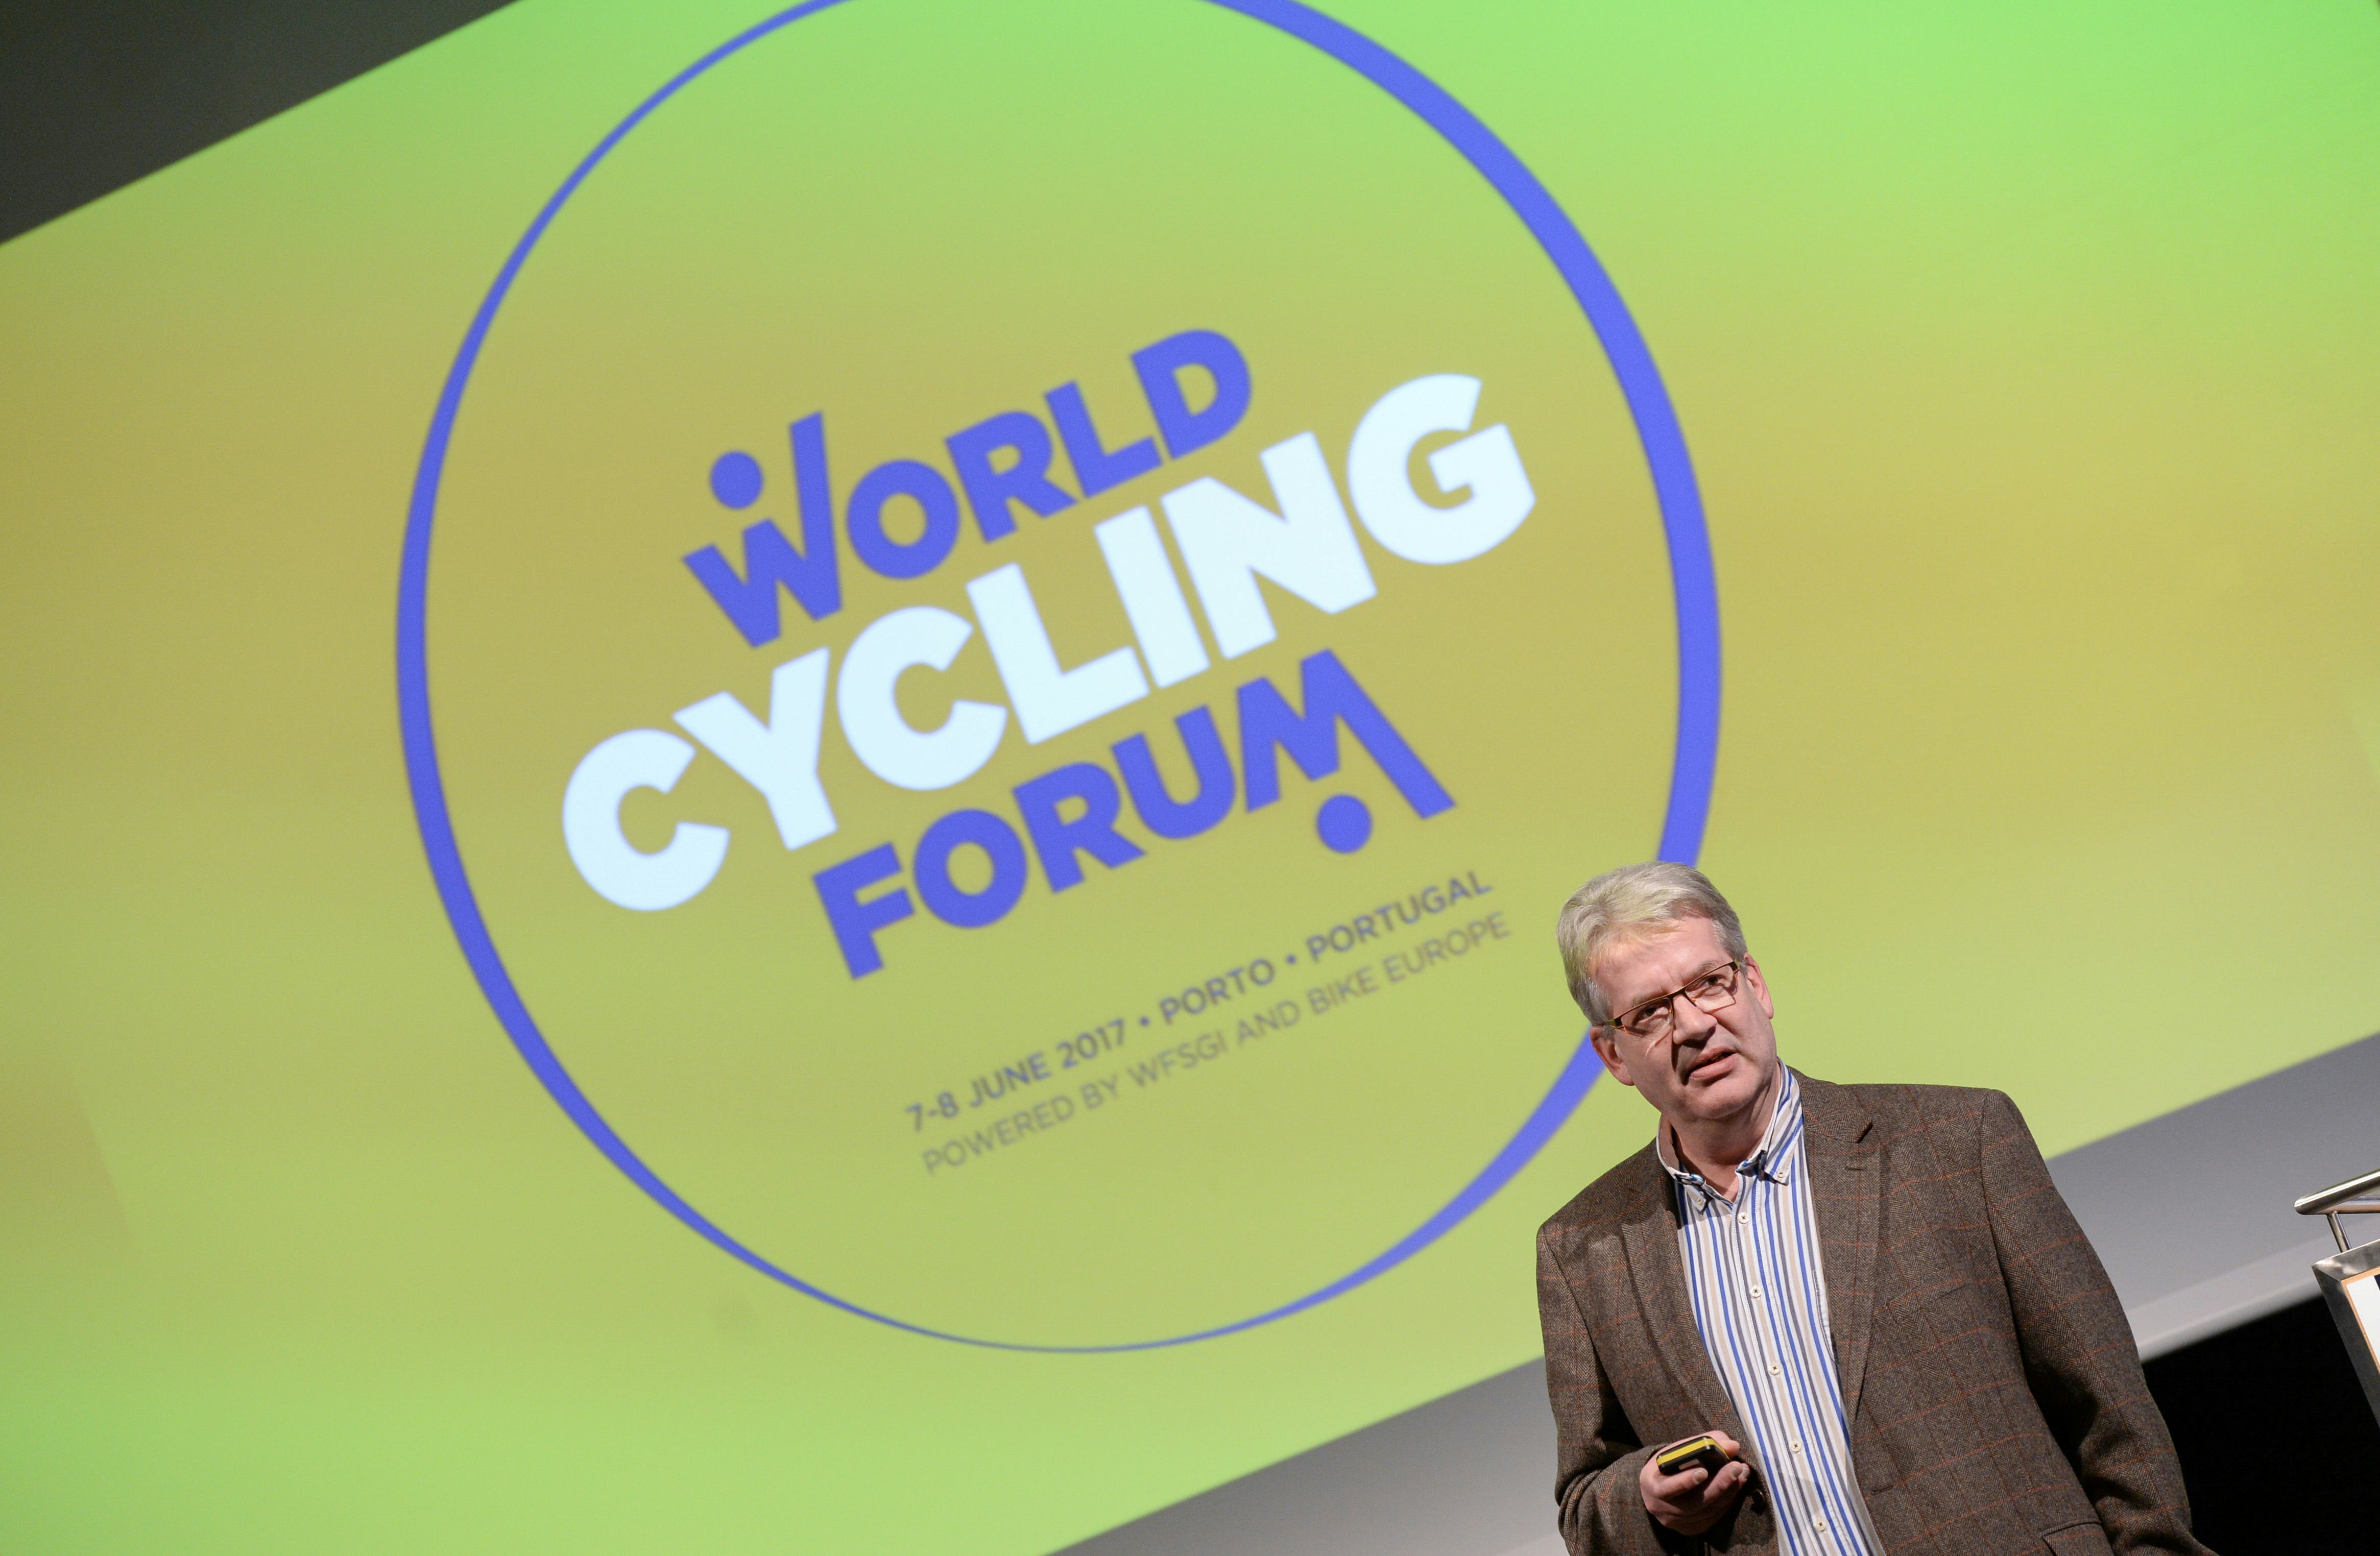 Accell Group’s COO, Jeroen Snijders Blok, ‘Keynote speakers’ line-up for World Cycling Forum is impressive. I expect to get answers on what we can learn and adapt in our industry from footwear industry and fast fashion with regards to consumer centricity and just-in-time-manufacturing.’ – Photo WFSGI